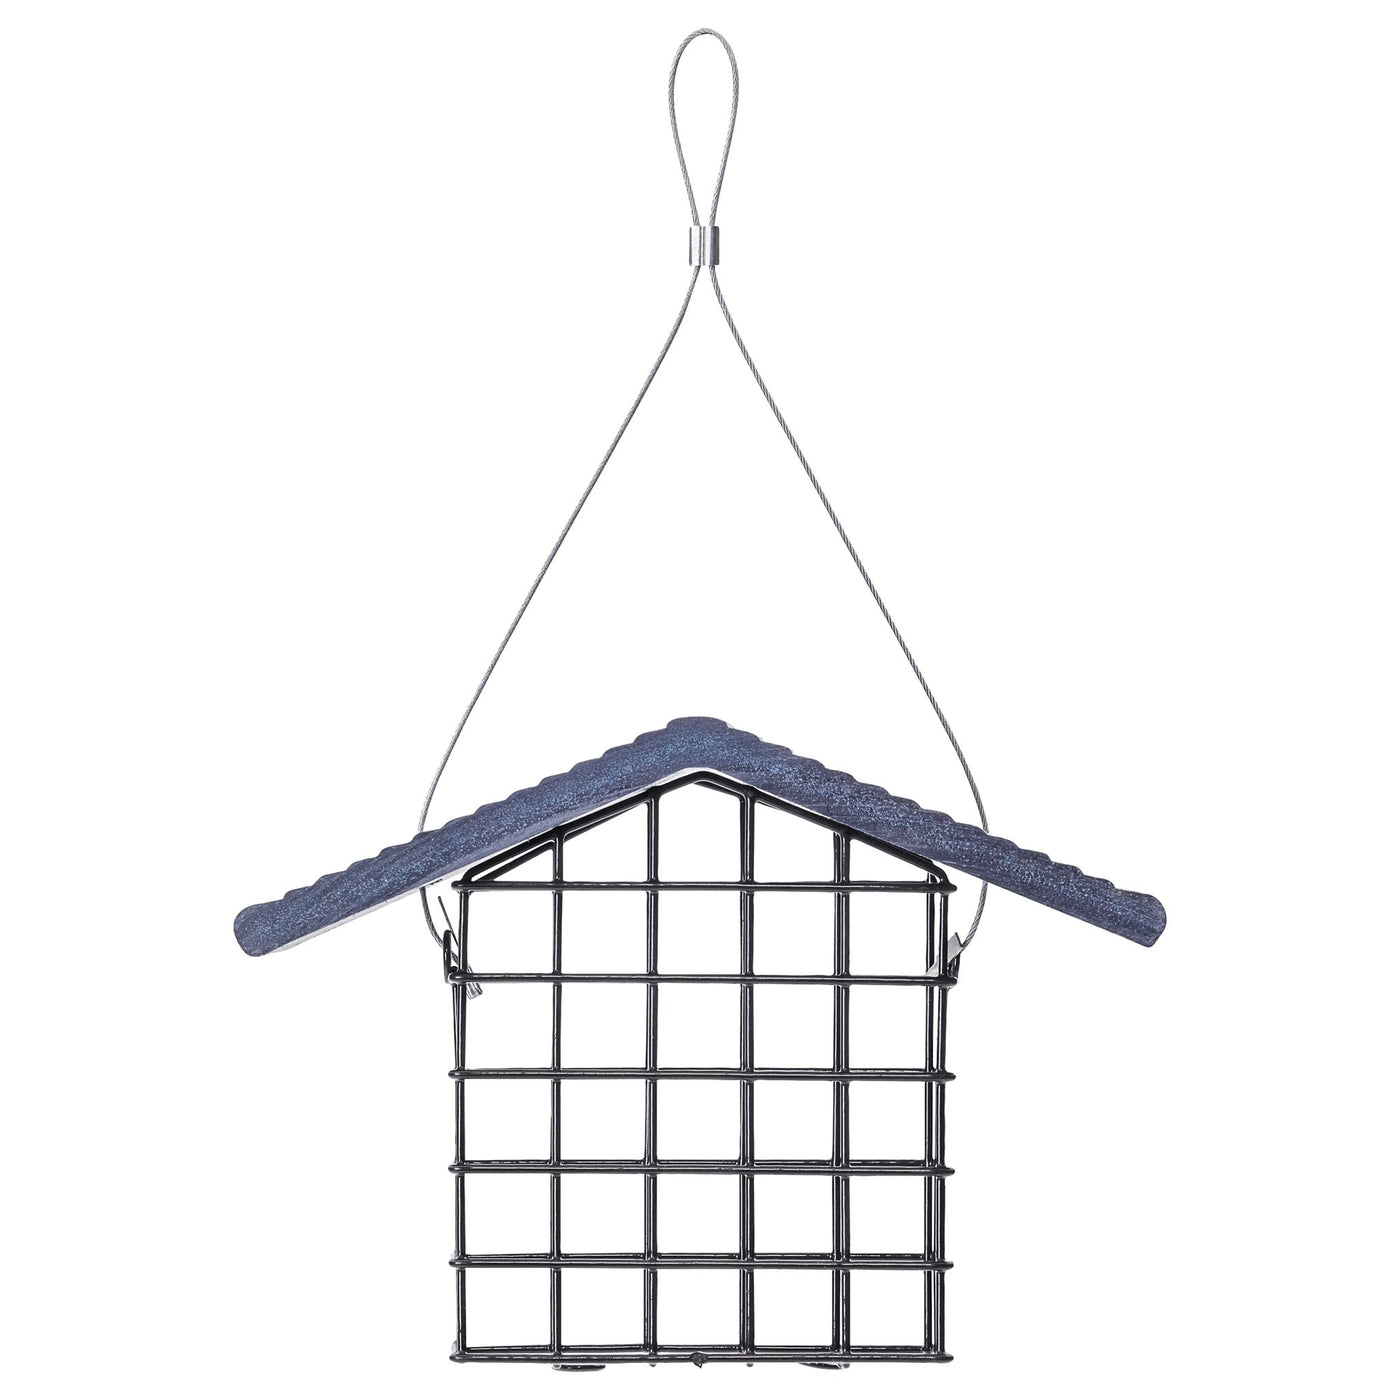 Single Suet Feeder with Recycled Patriot Roof - Birds Choice